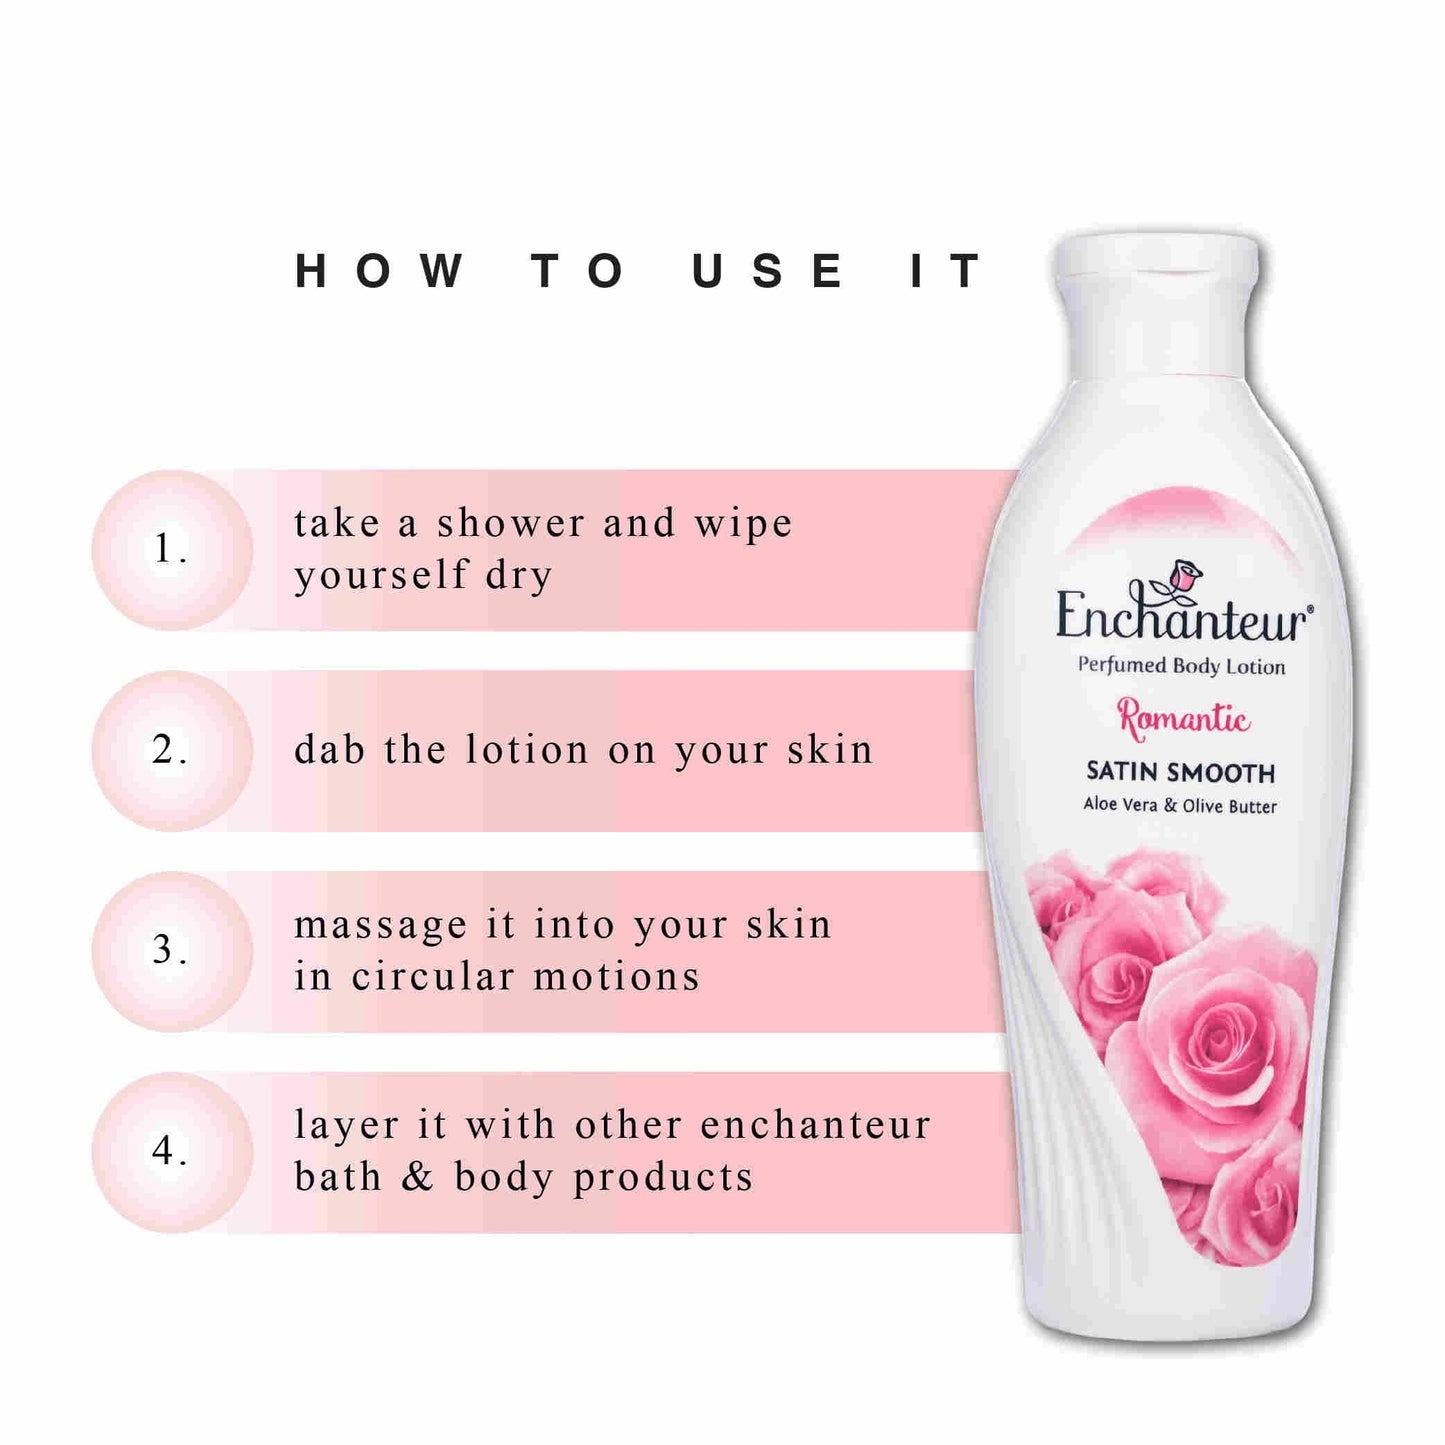 How to Use Enchanteur Romantic And Charming Perfumed Body Lotion 250 ml